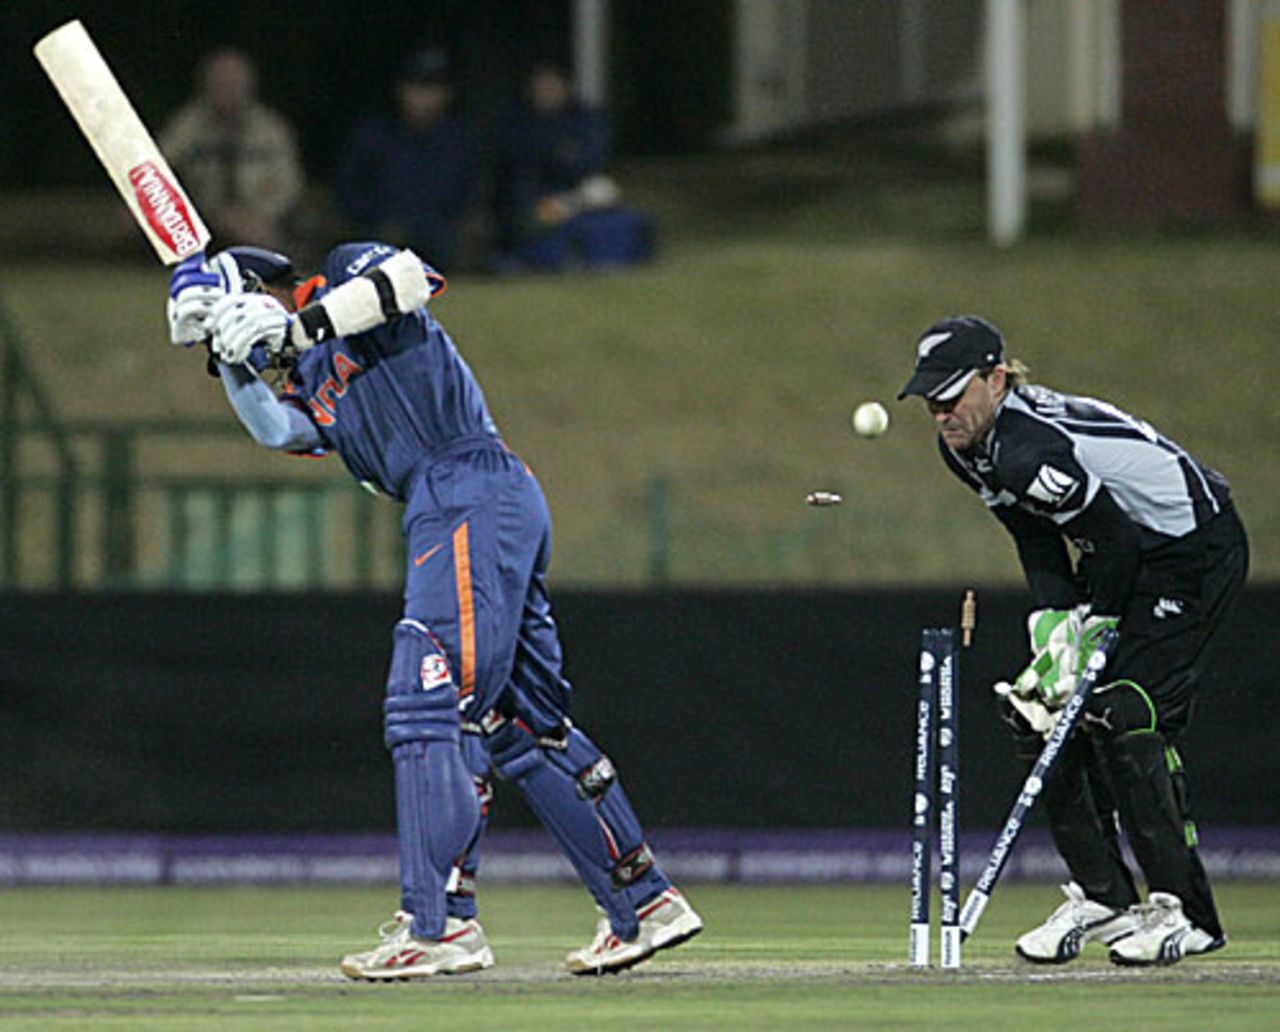 Rahul Dravid is cleaned up by Jeetan Patel, India v New Zealand, ICC Champions Trophy warm-up match, Potchefstroom, September 20, 2009